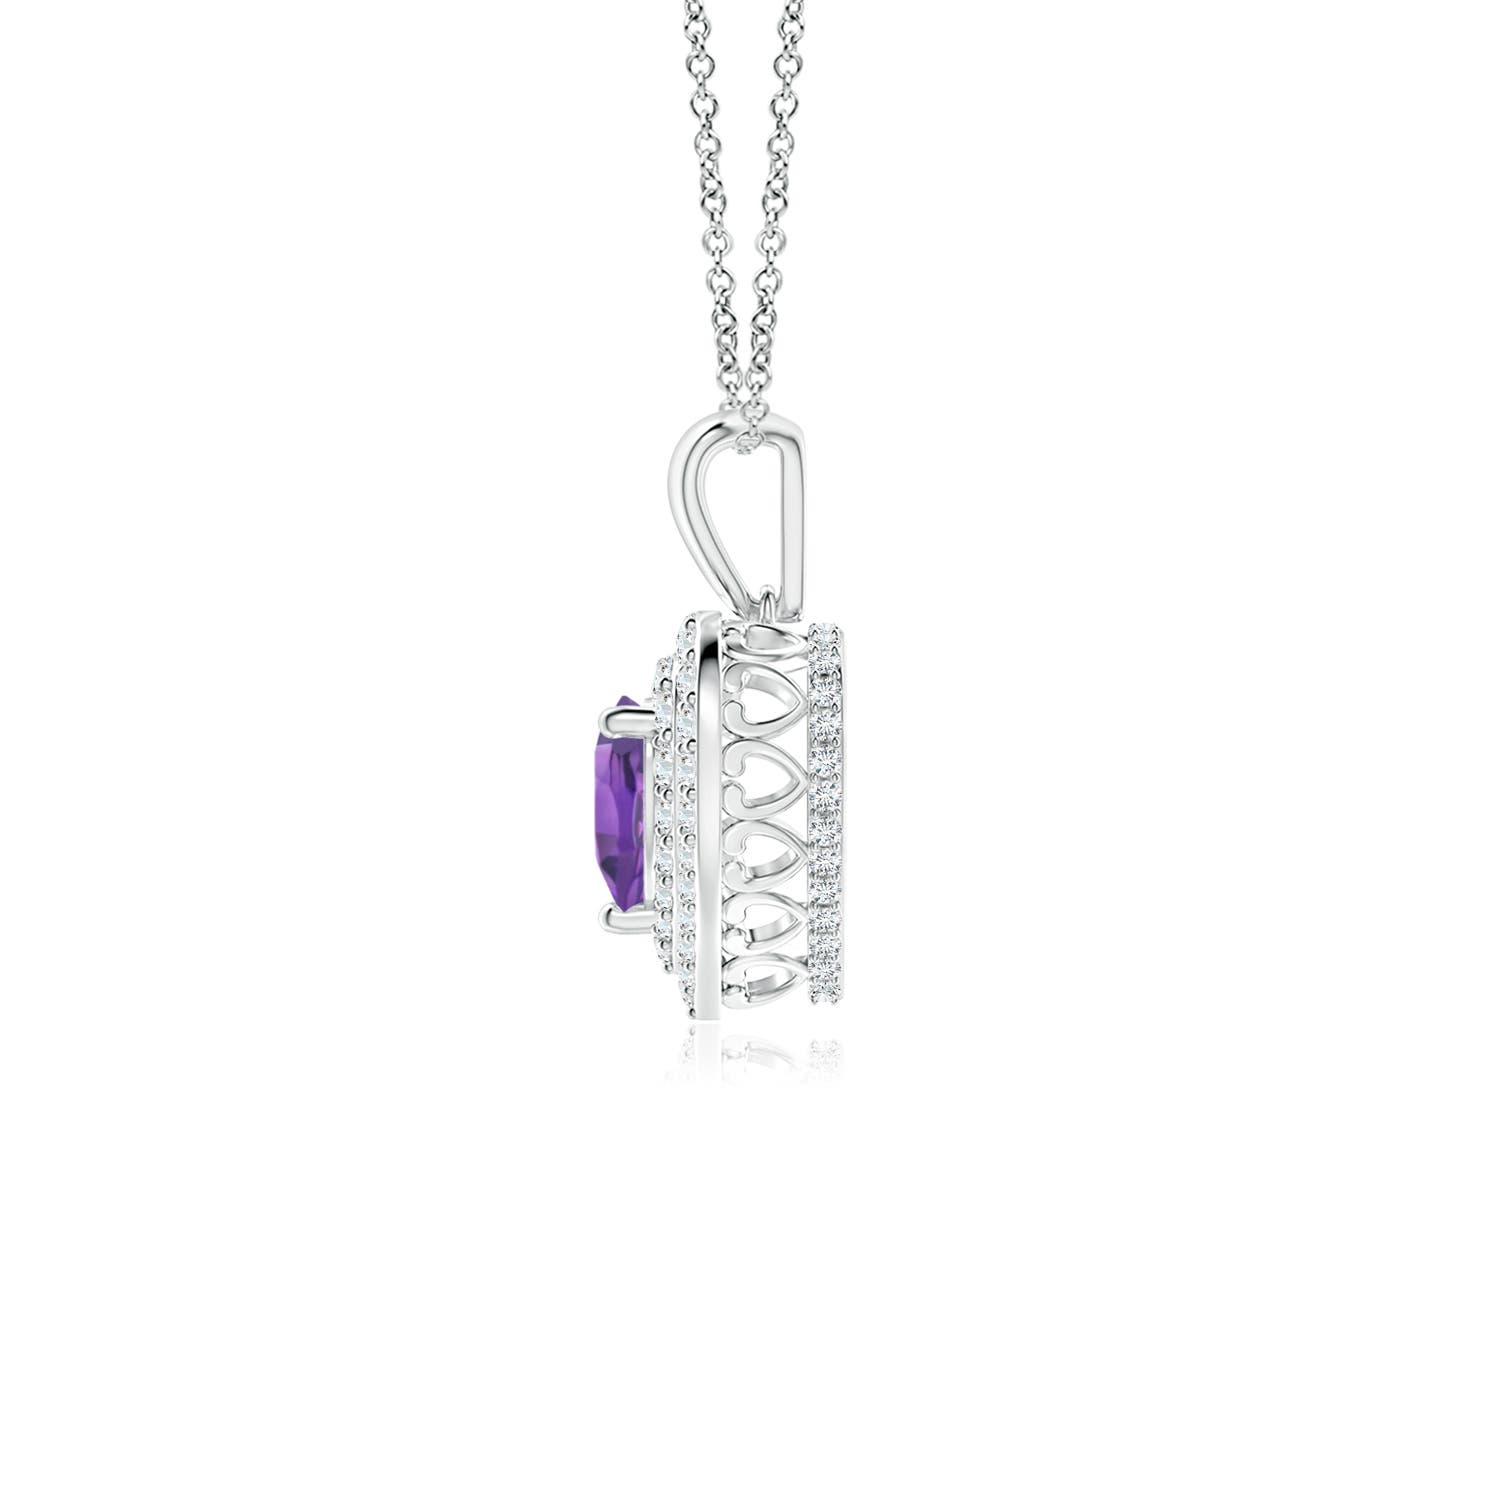 AA - Amethyst / 0.74 CT / 14 KT White Gold